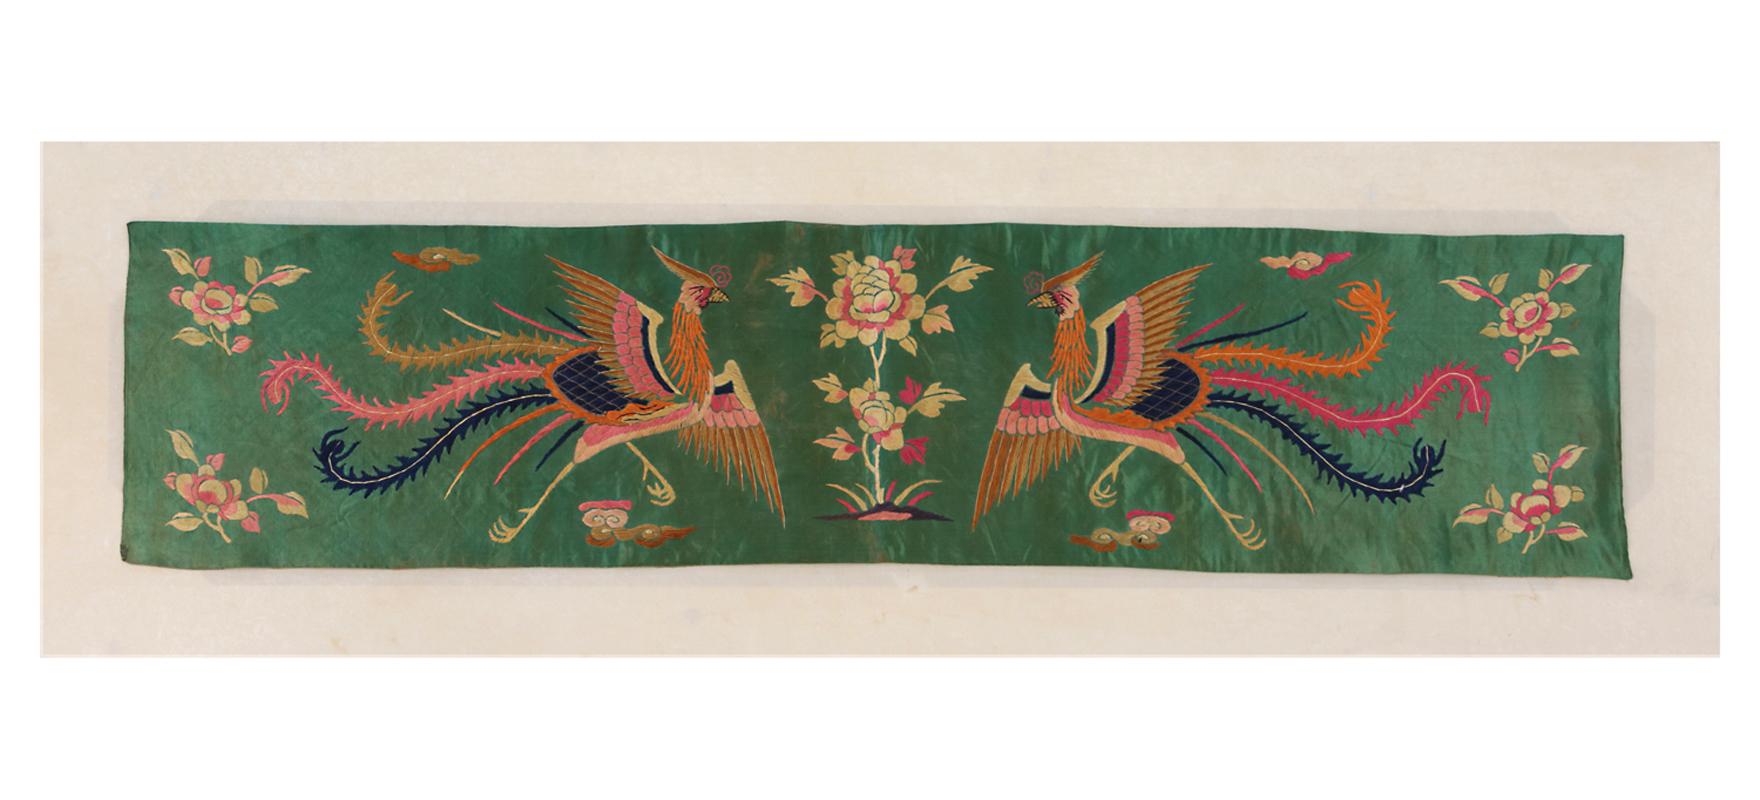 Other Antique Chinese Silk Textile, ca. 1880 For Sale